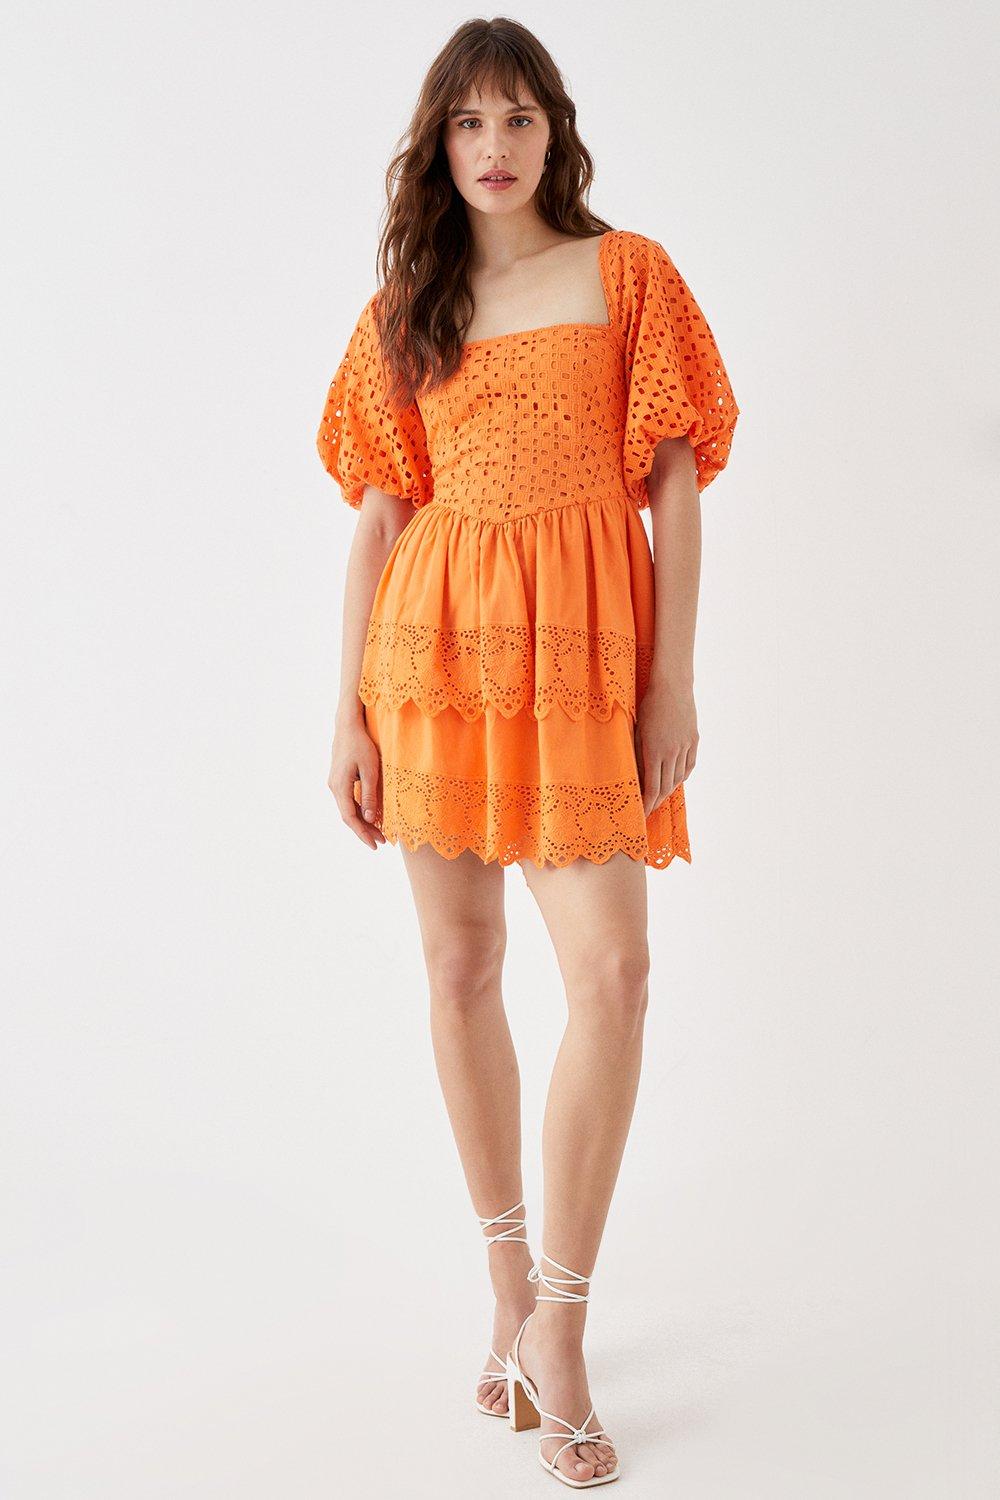 Lace Up Tiered Skirt Broderie Mini Dress - Orange